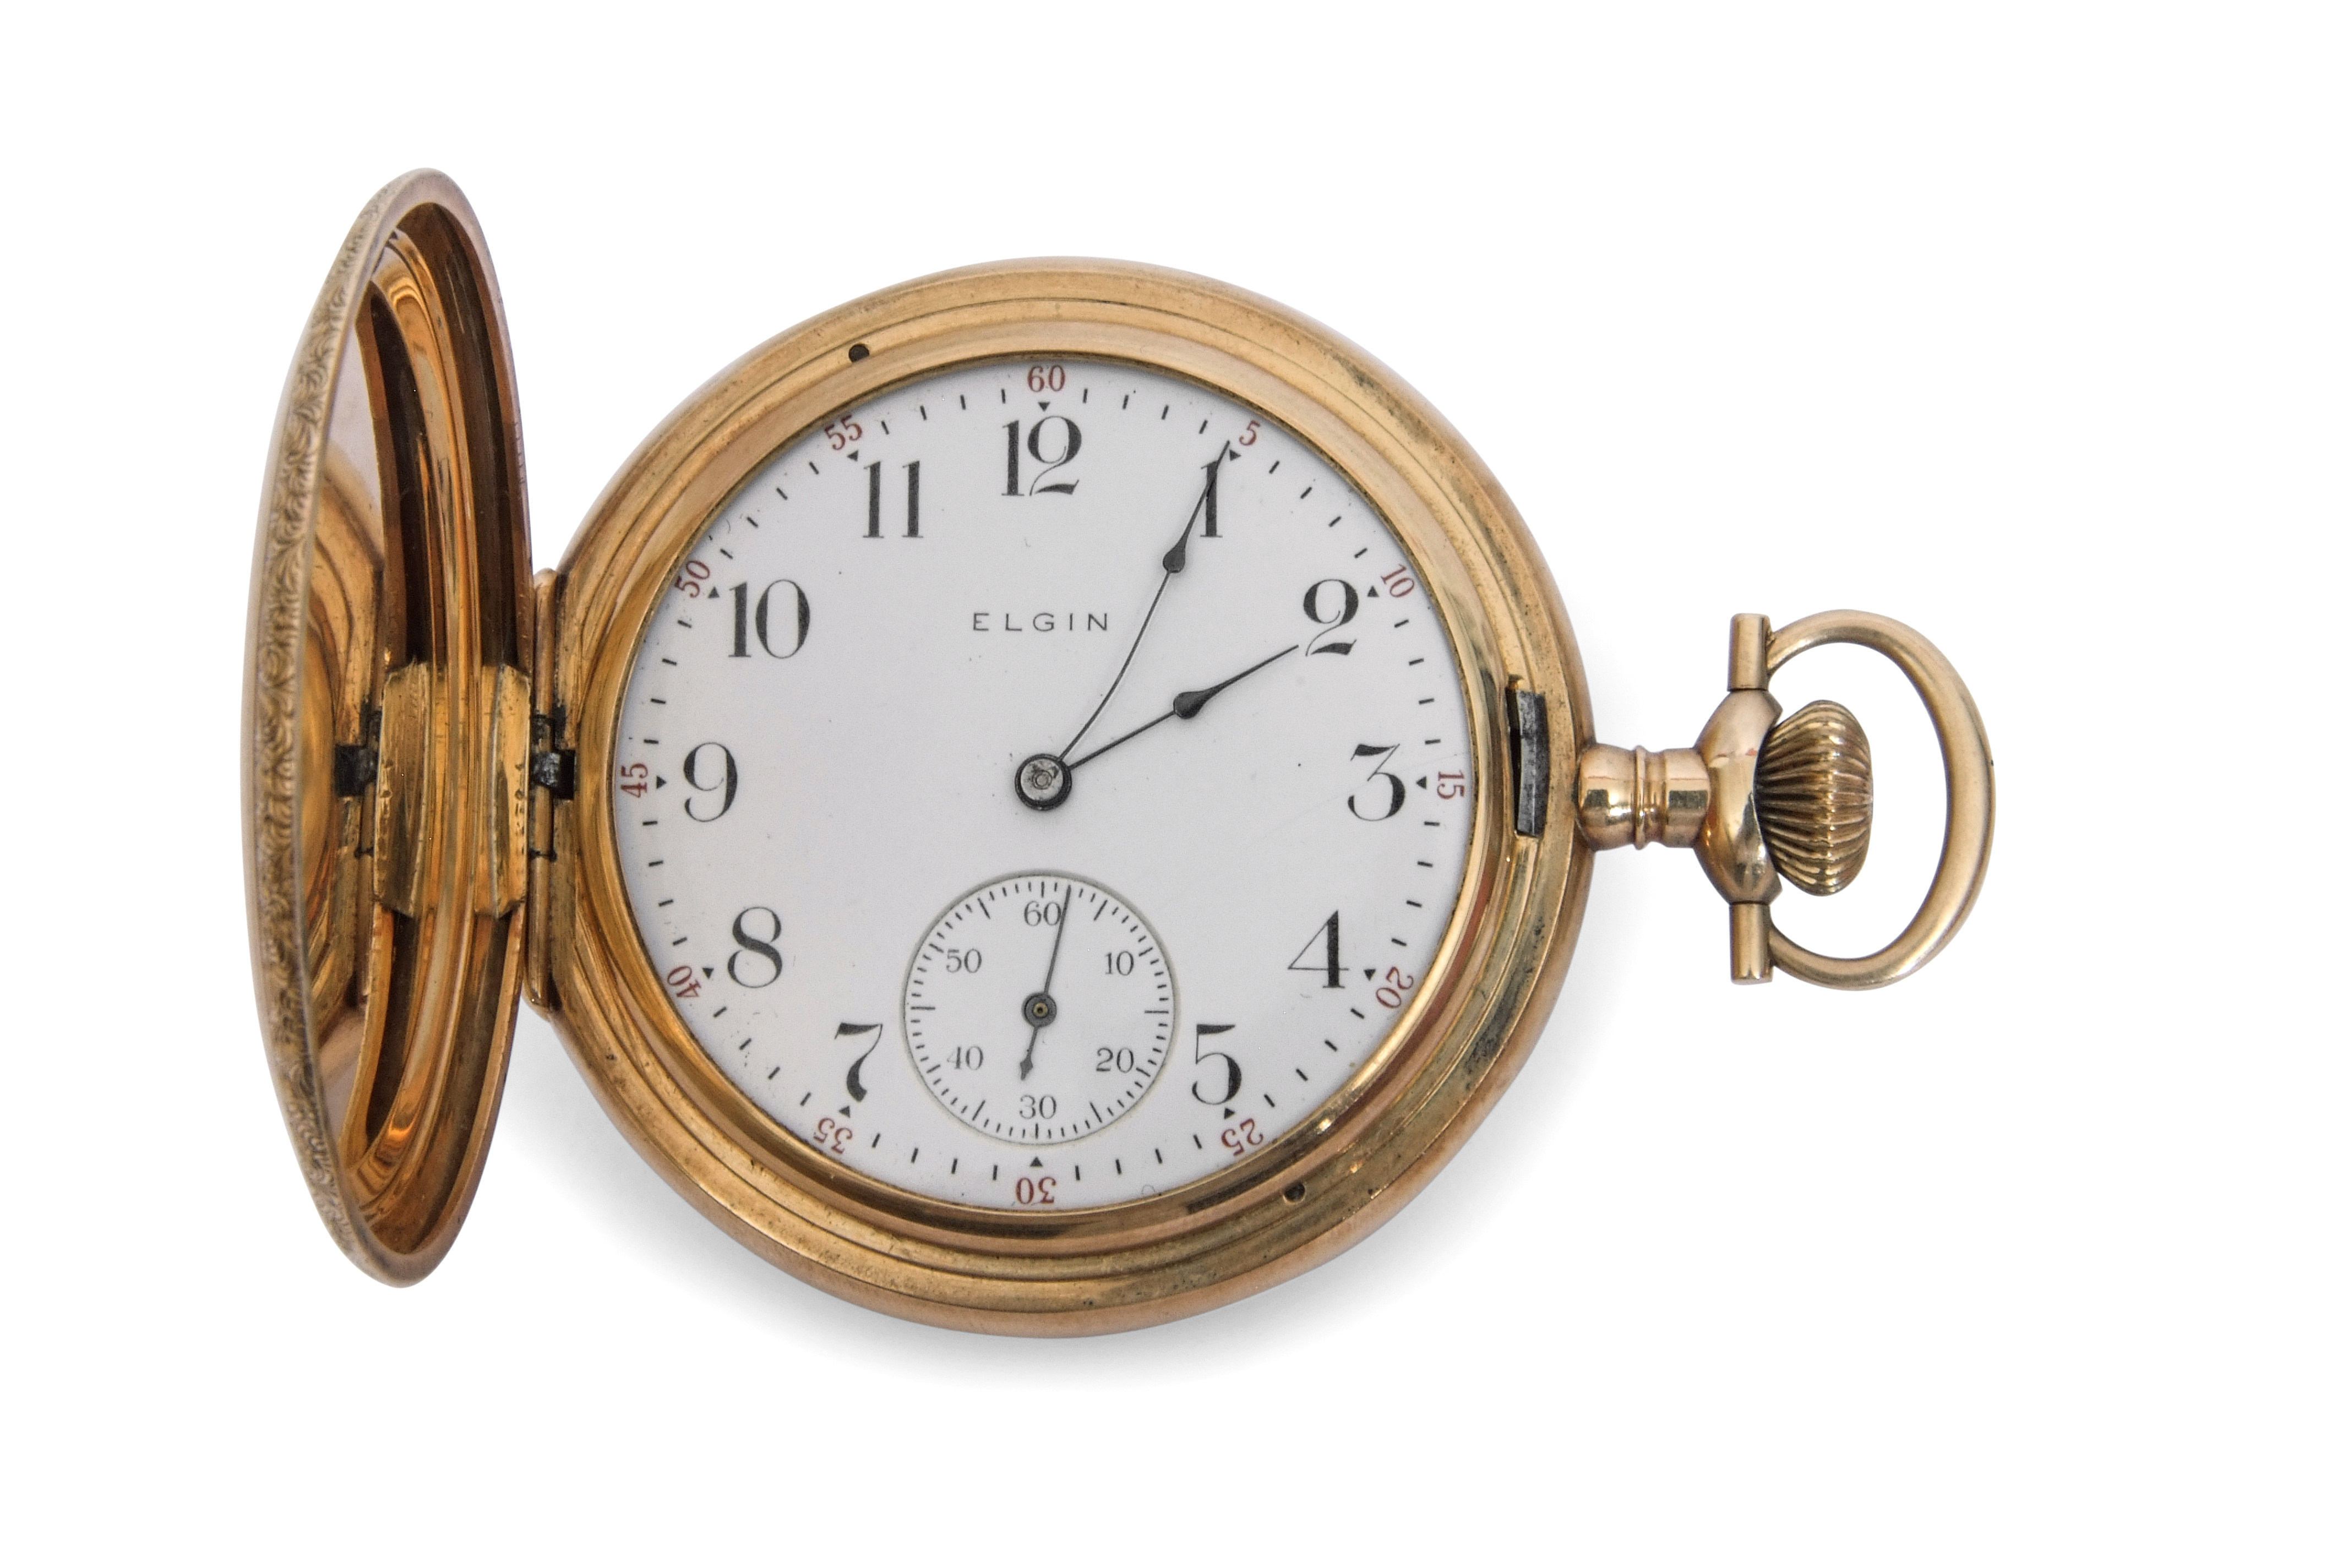 Second quarter of 20th century 14K gold cased full hunter pocket watch by Elgin, the back and